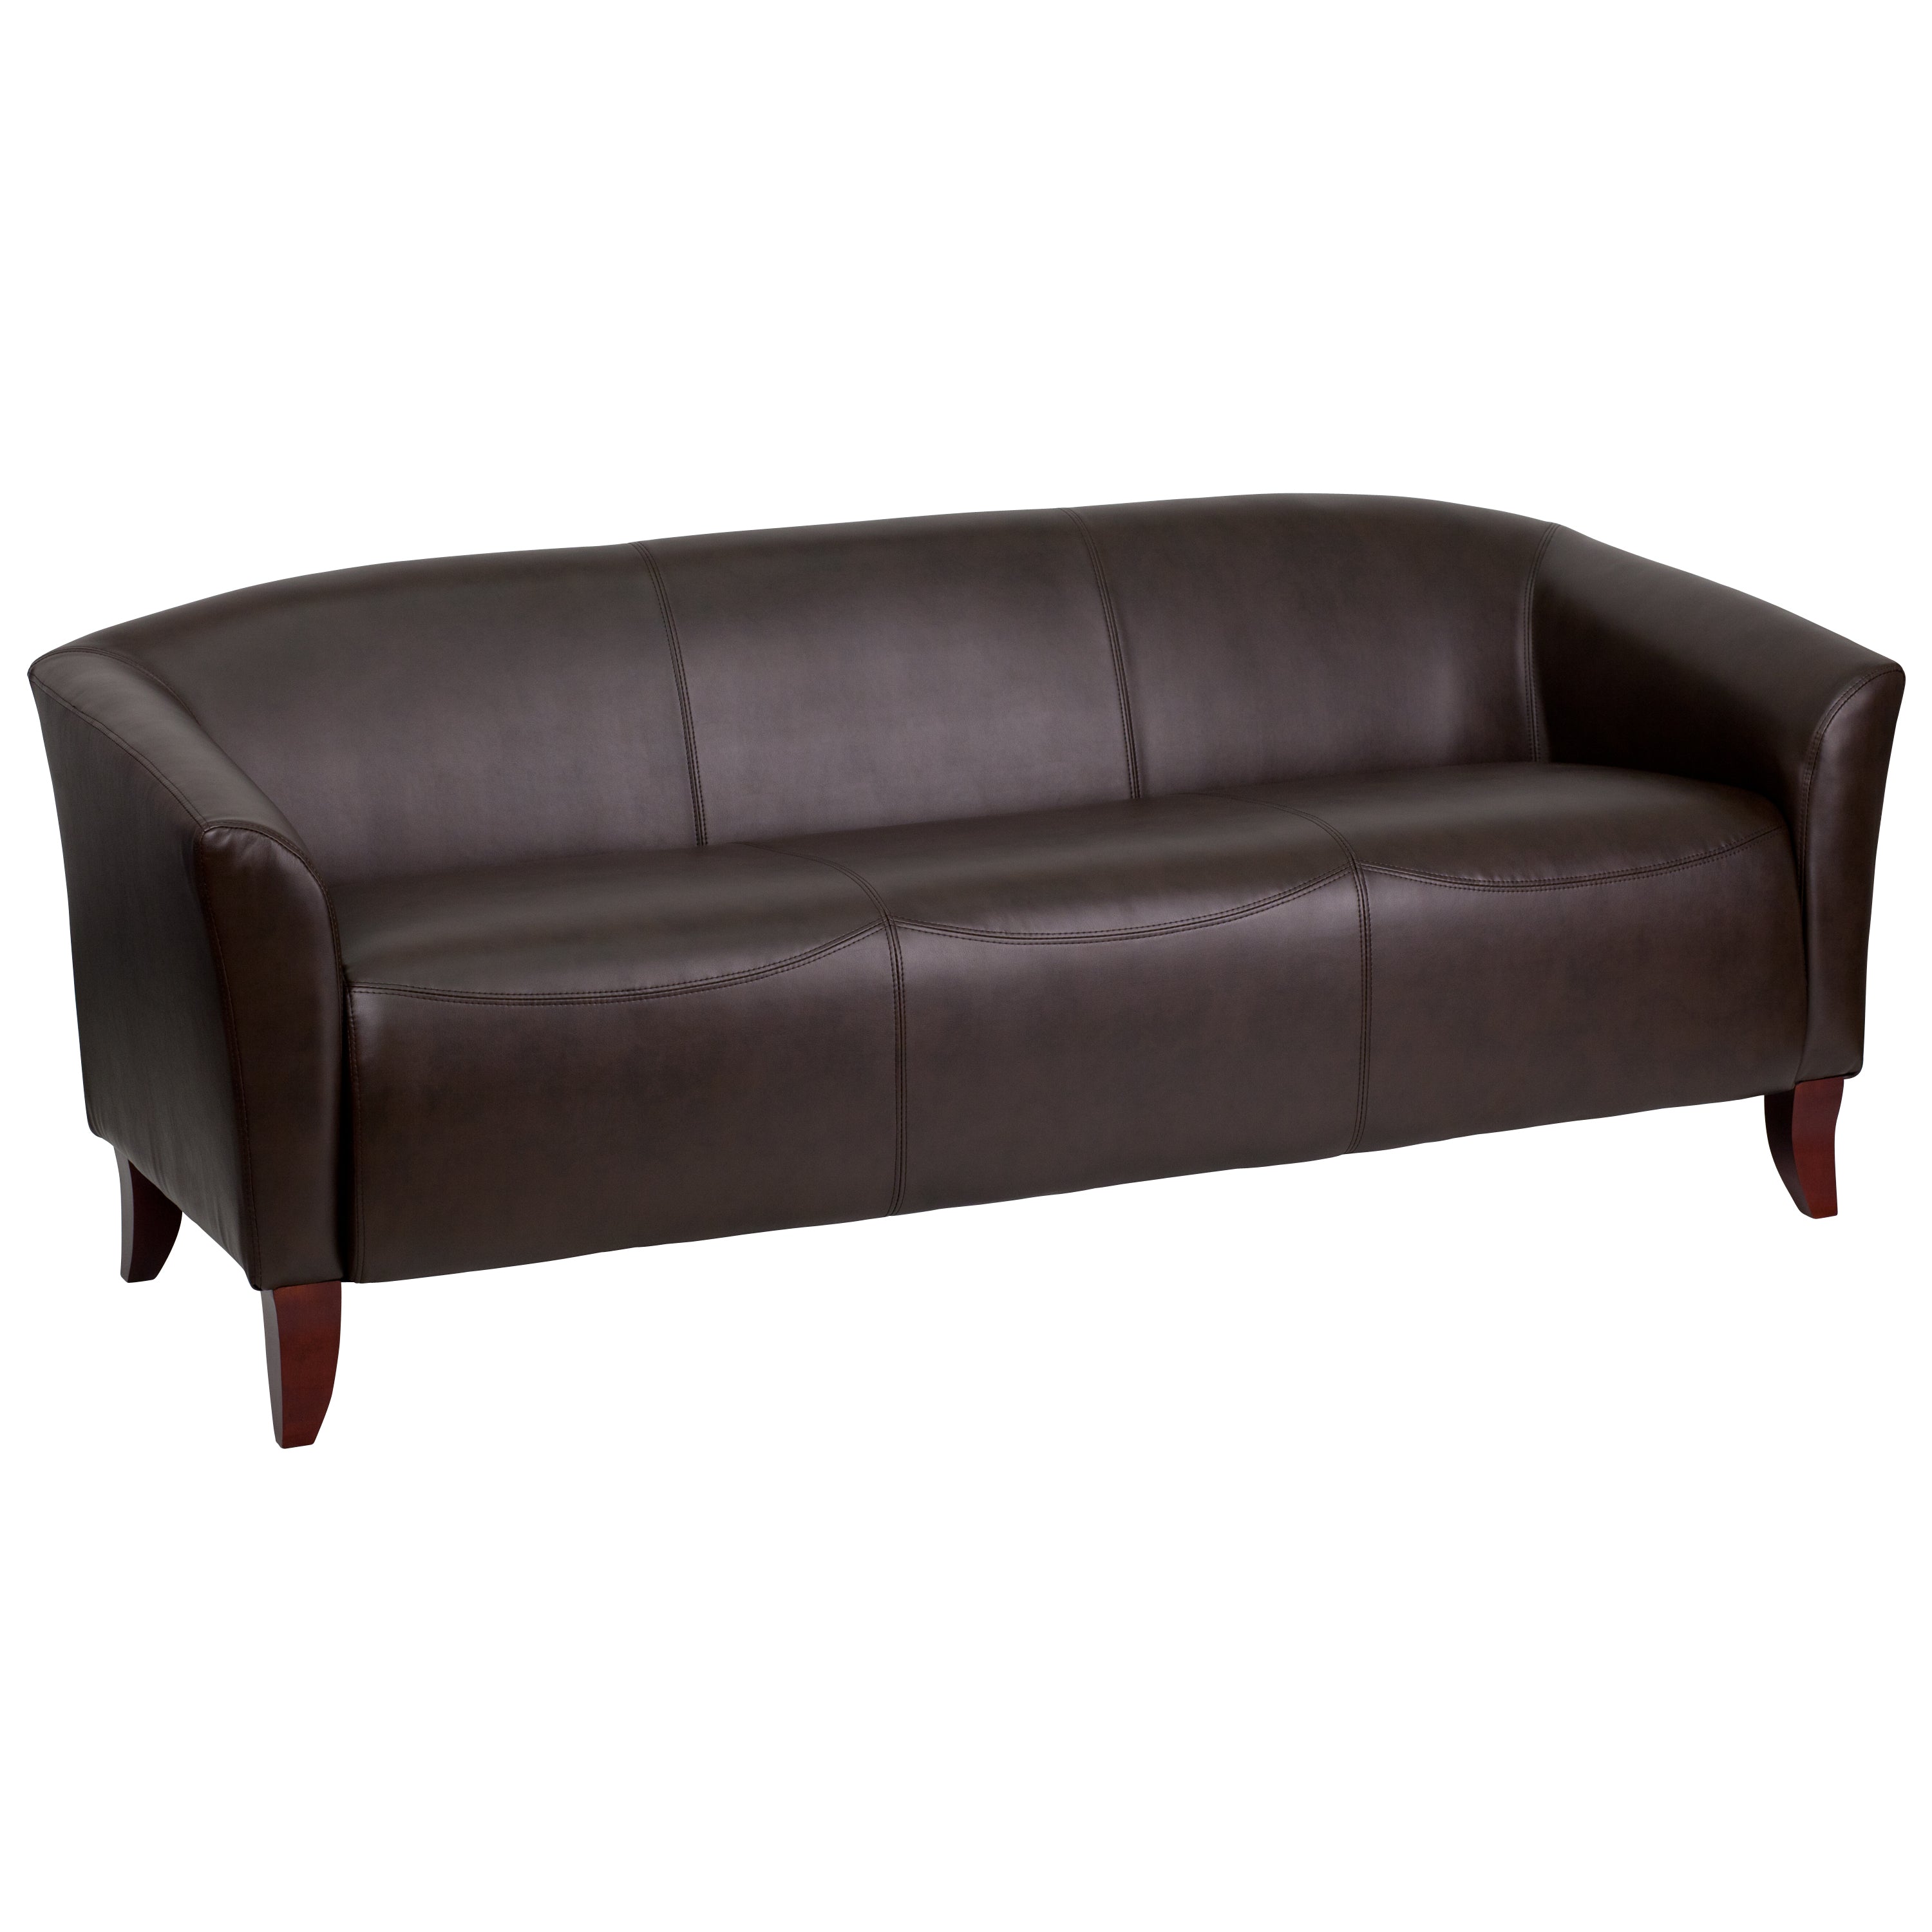 HERCULES Imperial Series LeatherSoft Sofa with Cherry Wood Feet-Reception Sofa-Flash Furniture-Wall2Wall Furnishings